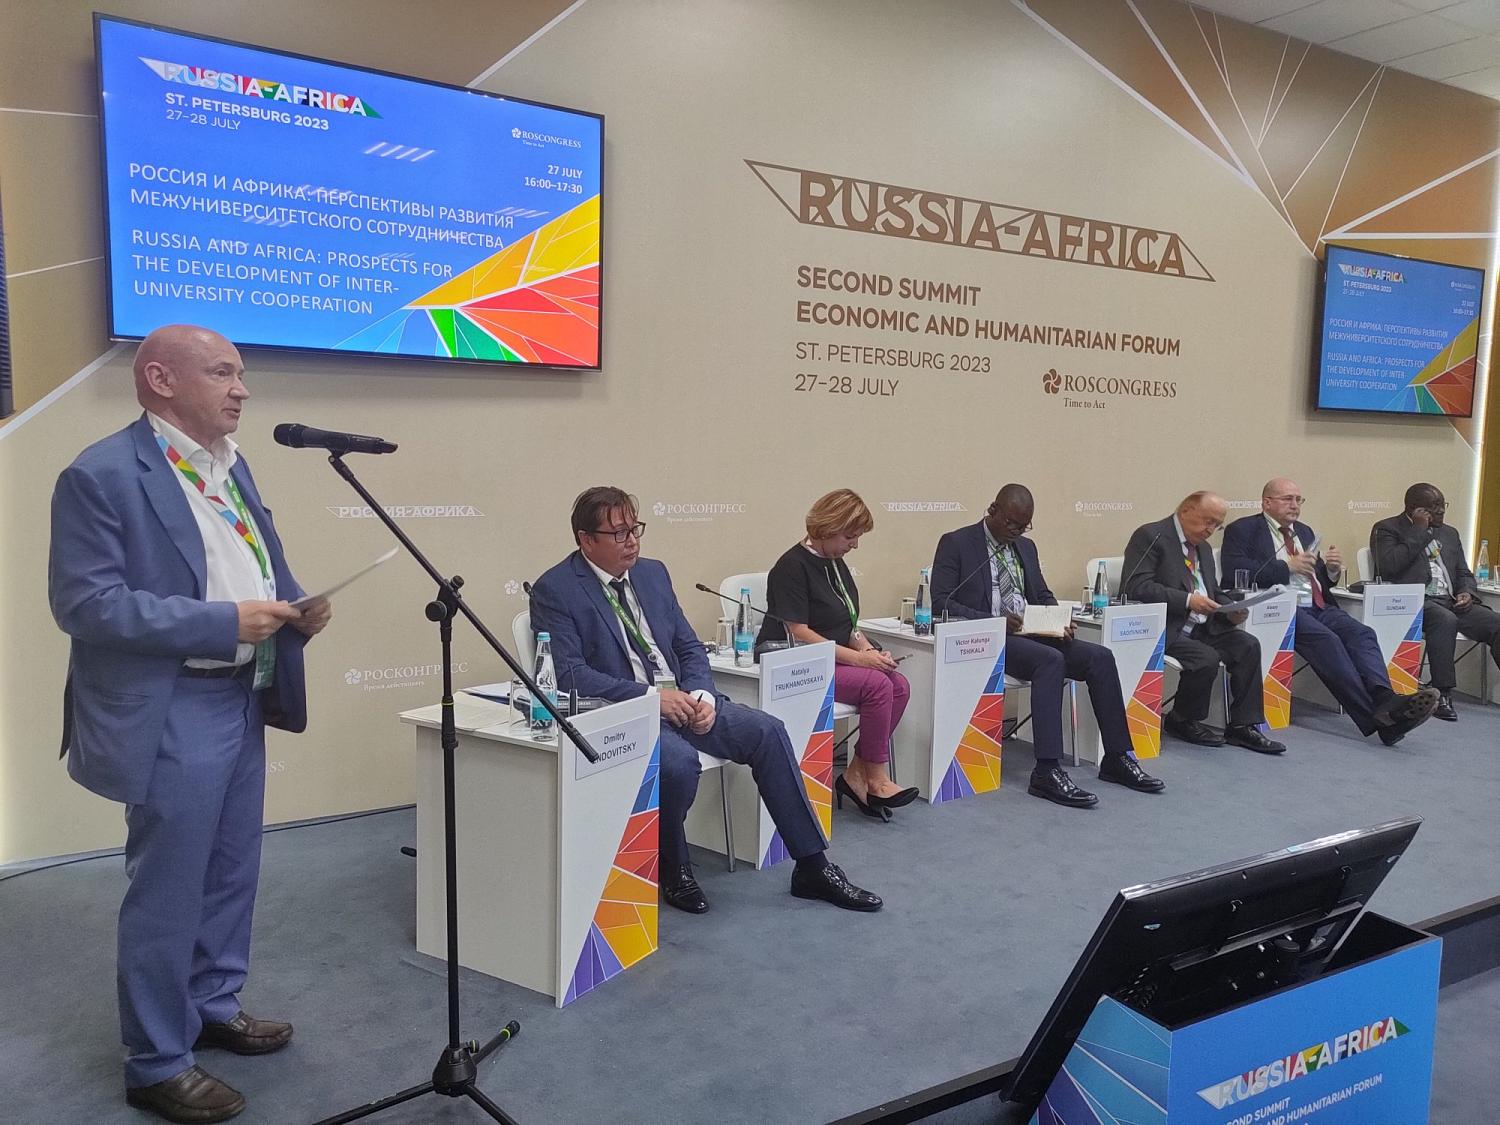 MR. Vladimir Platonov presented the MCCI's project on working with foreign students at the Russia-Africa Forum